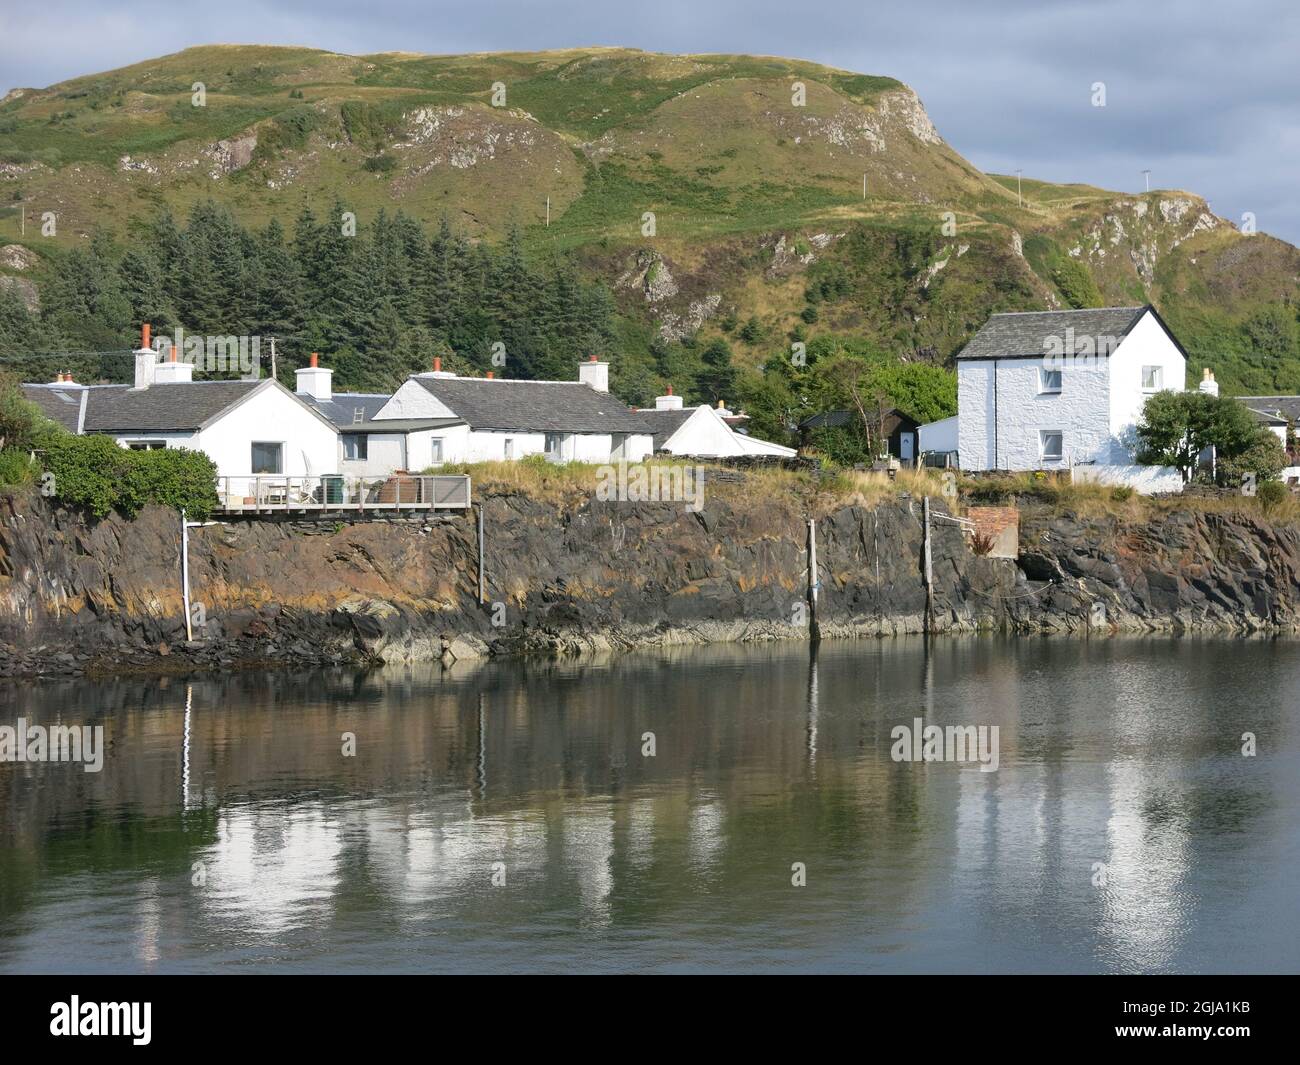 The picturesque village of Ellenabeich with traditional white-washed cottages set against a craggy mountain backdrop; summer 2021, the Inner Hebrides. Stock Photo